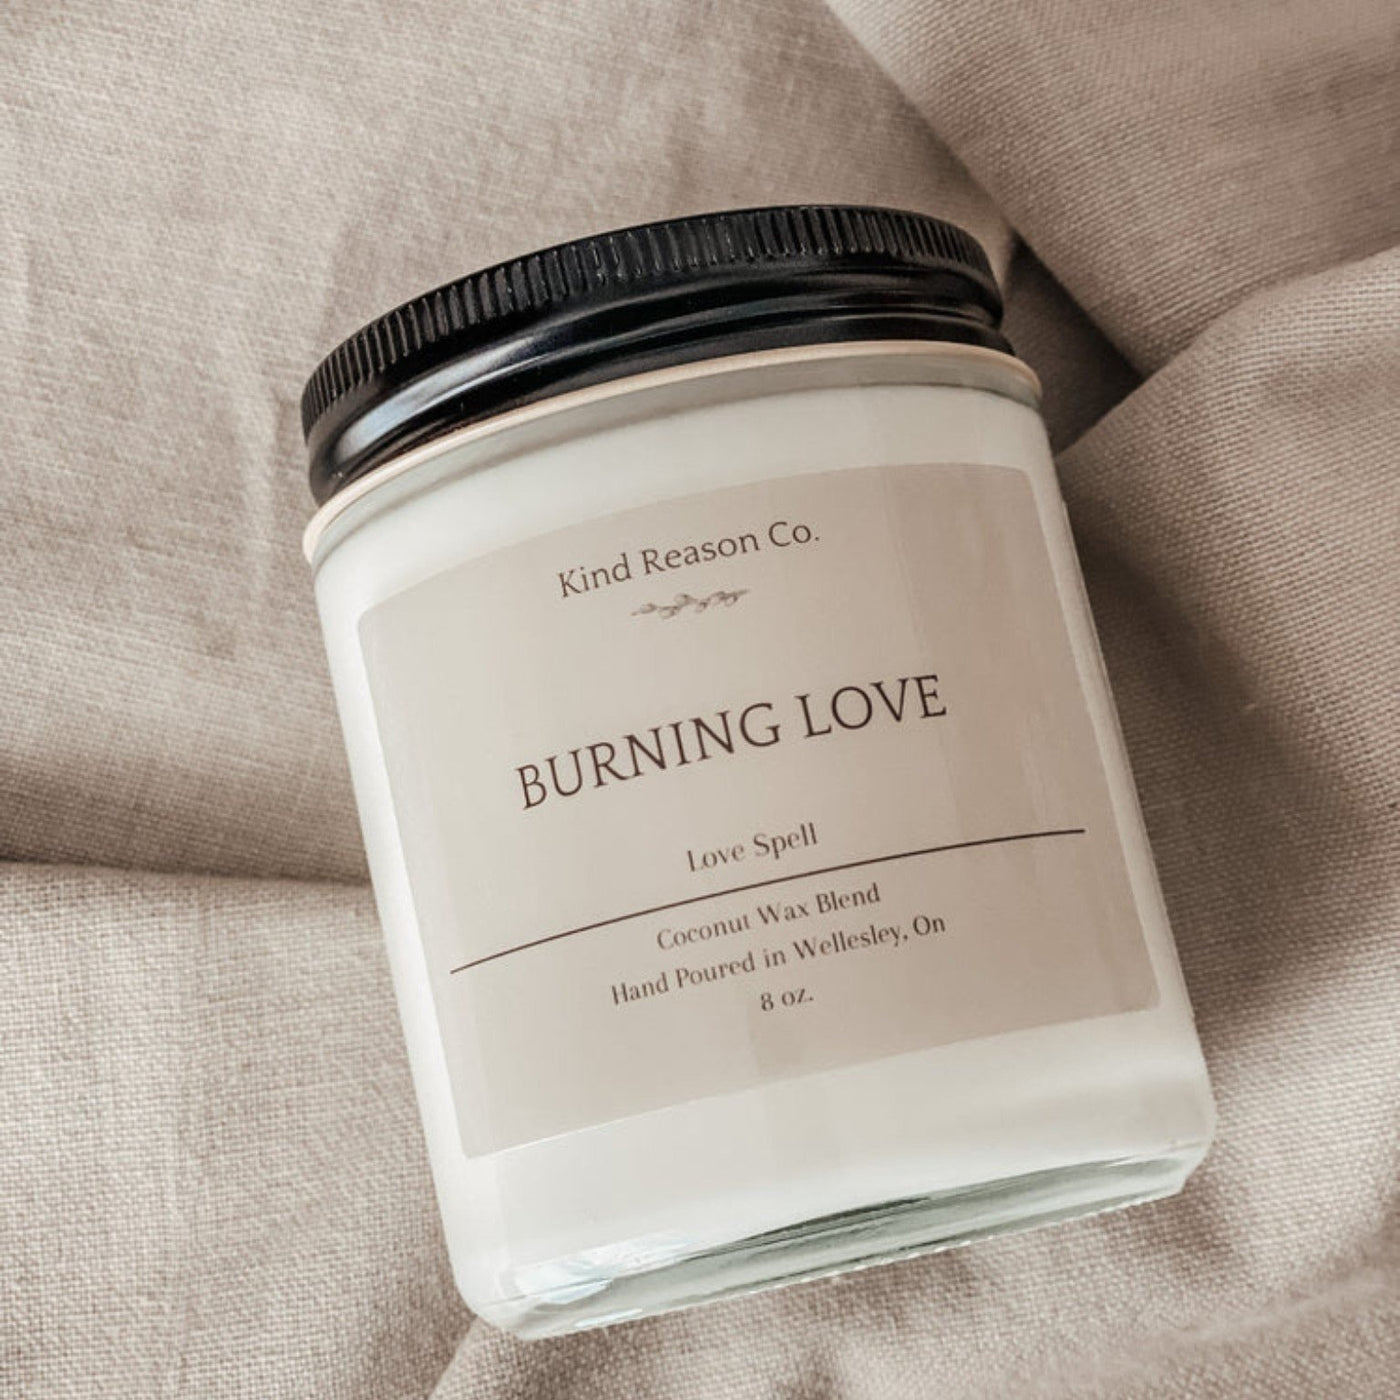 Love Spell Candle: Burning Love scent. 8oz size, toxin-free candle - At Avalon Willow Home